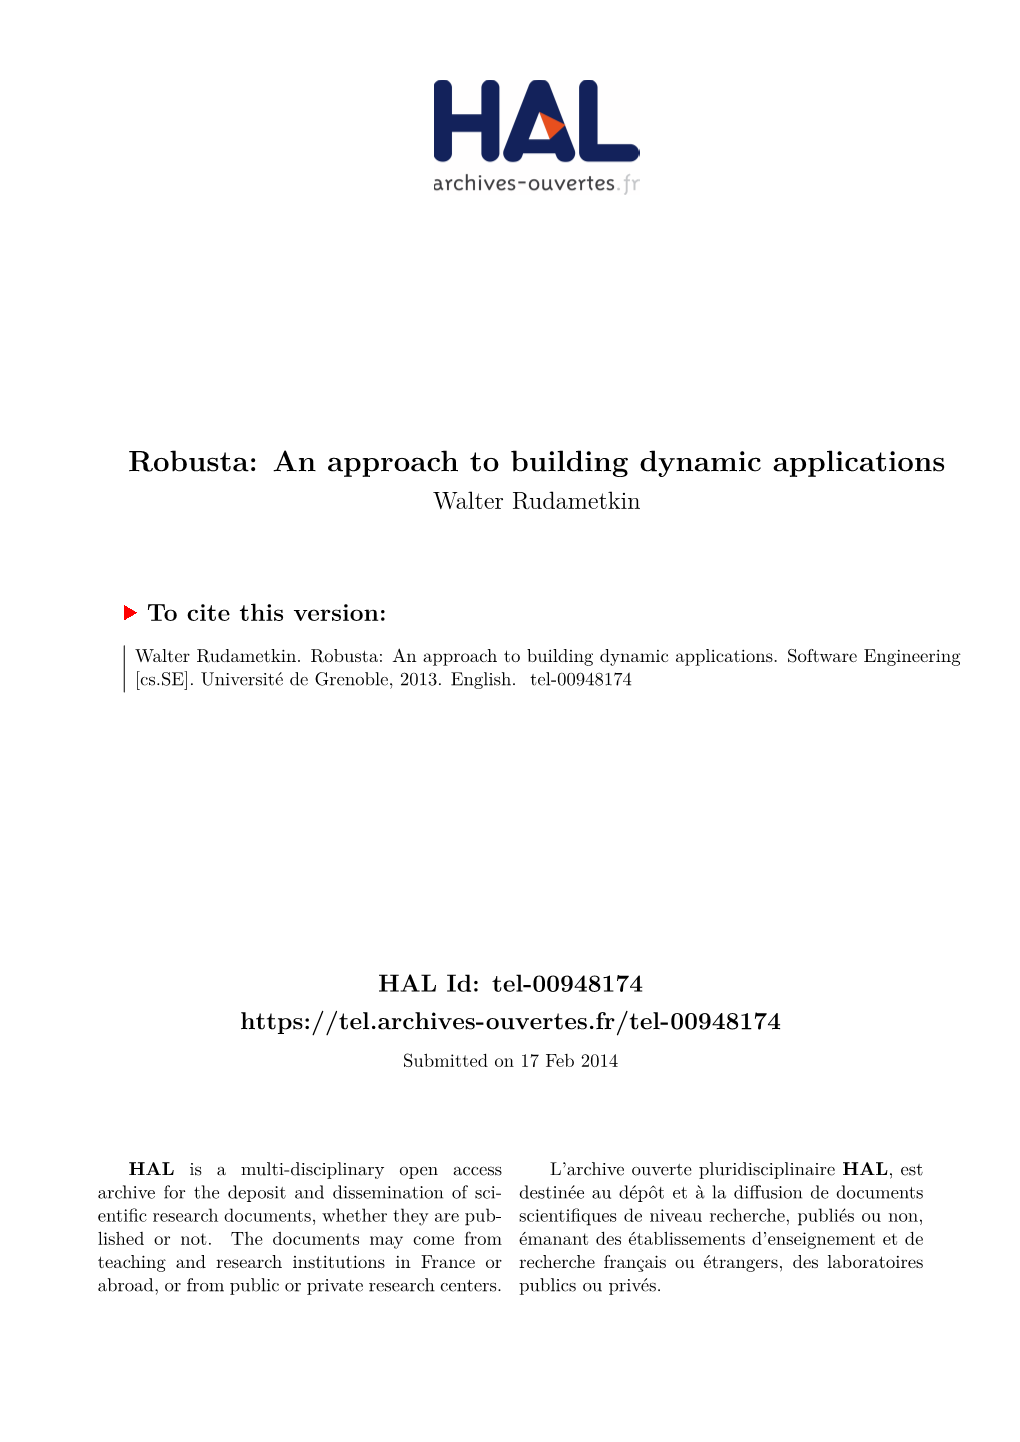 Robusta: an Approach to Building Dynamic Applications Walter Rudametkin